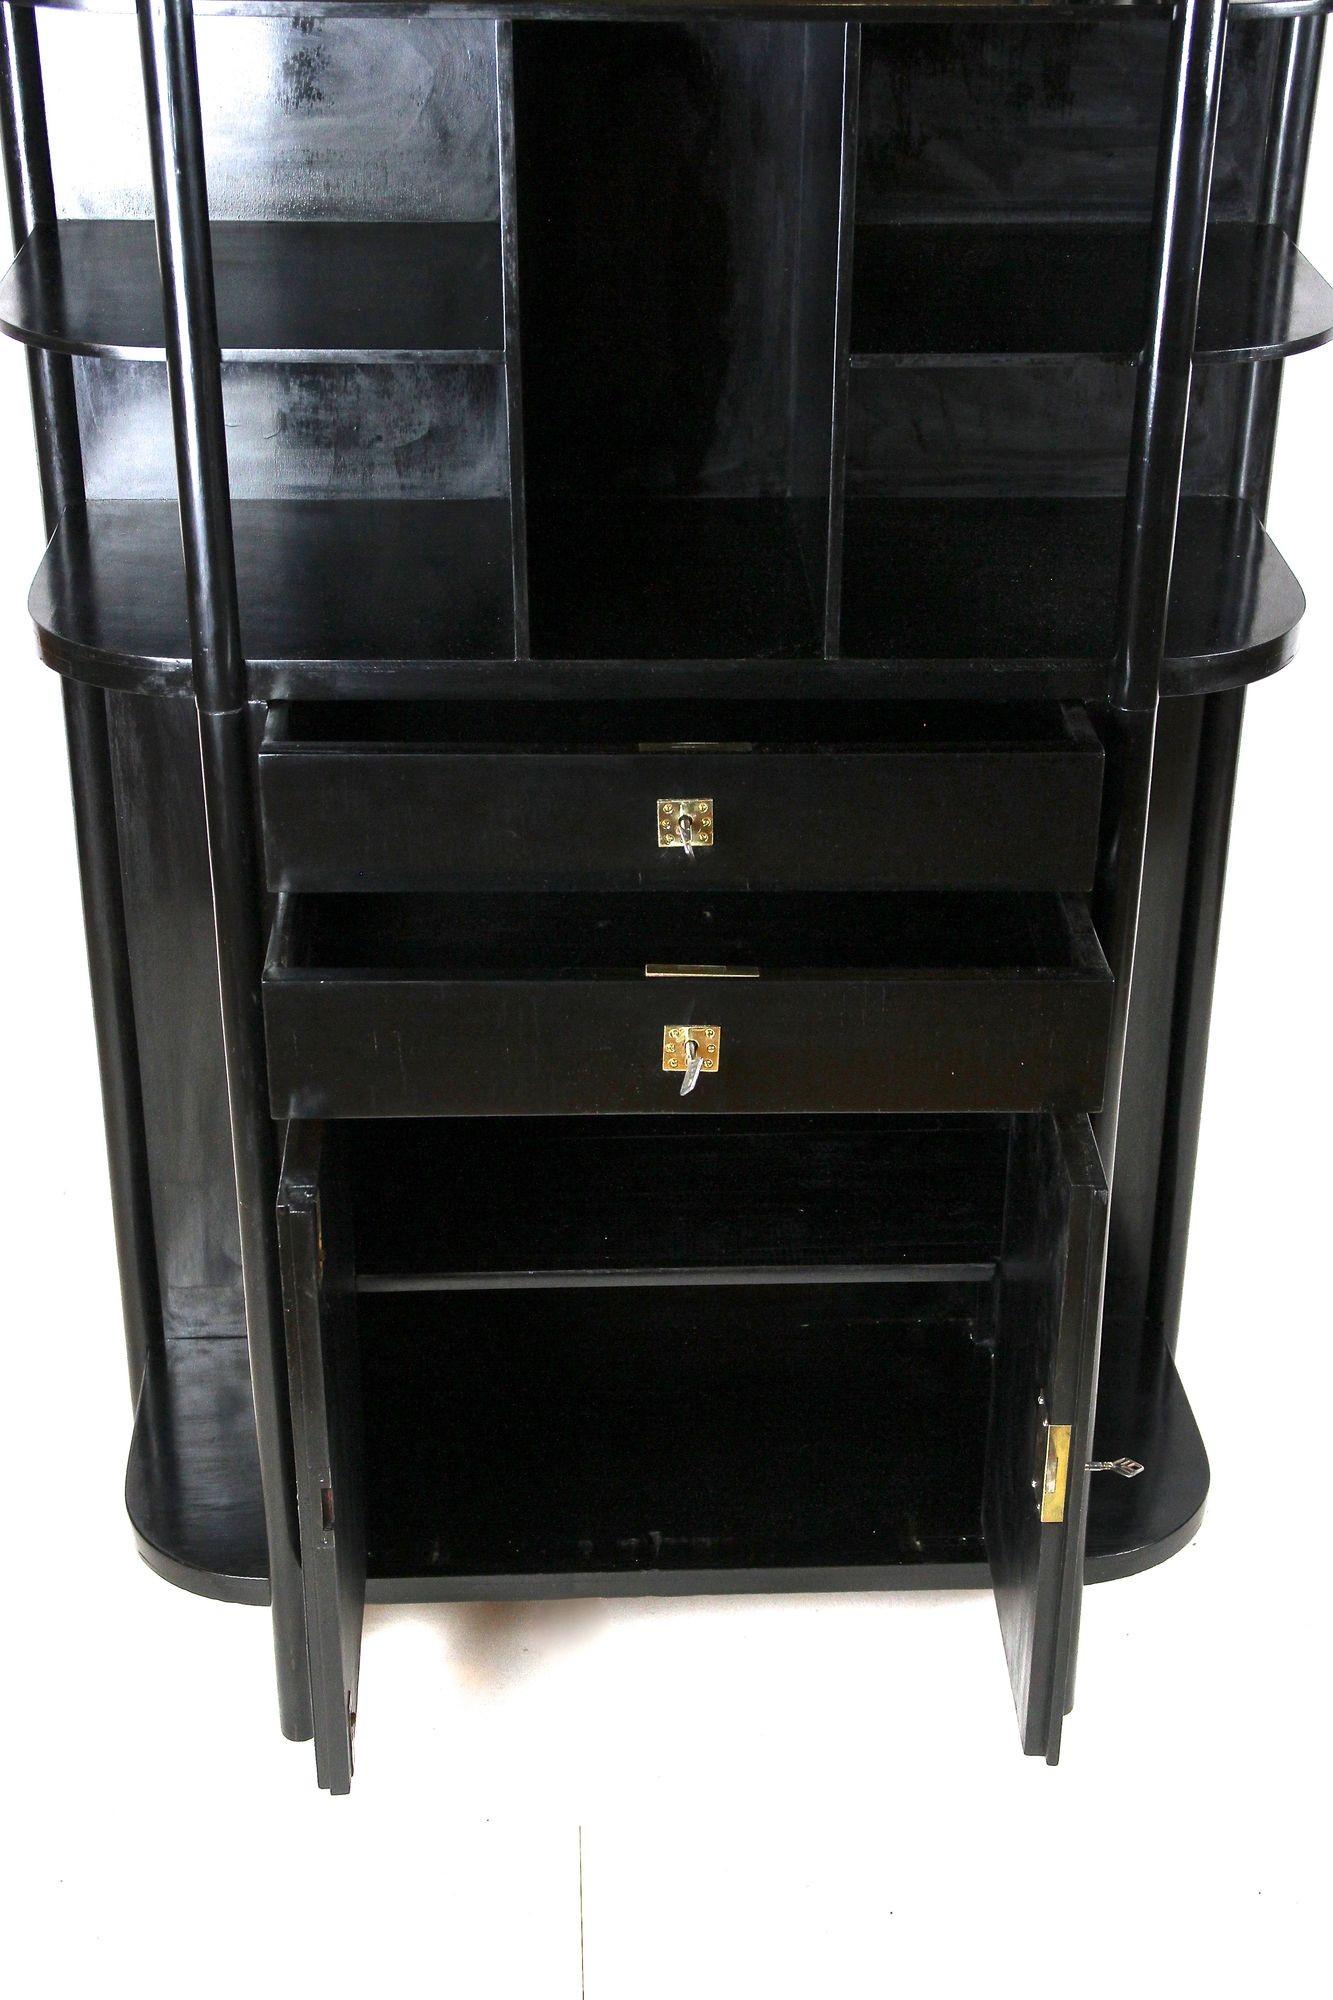 20th Century Black Art Nouveau Display Cabinet by Josef Hoffmann for Thonet, AT ca. 1905 For Sale